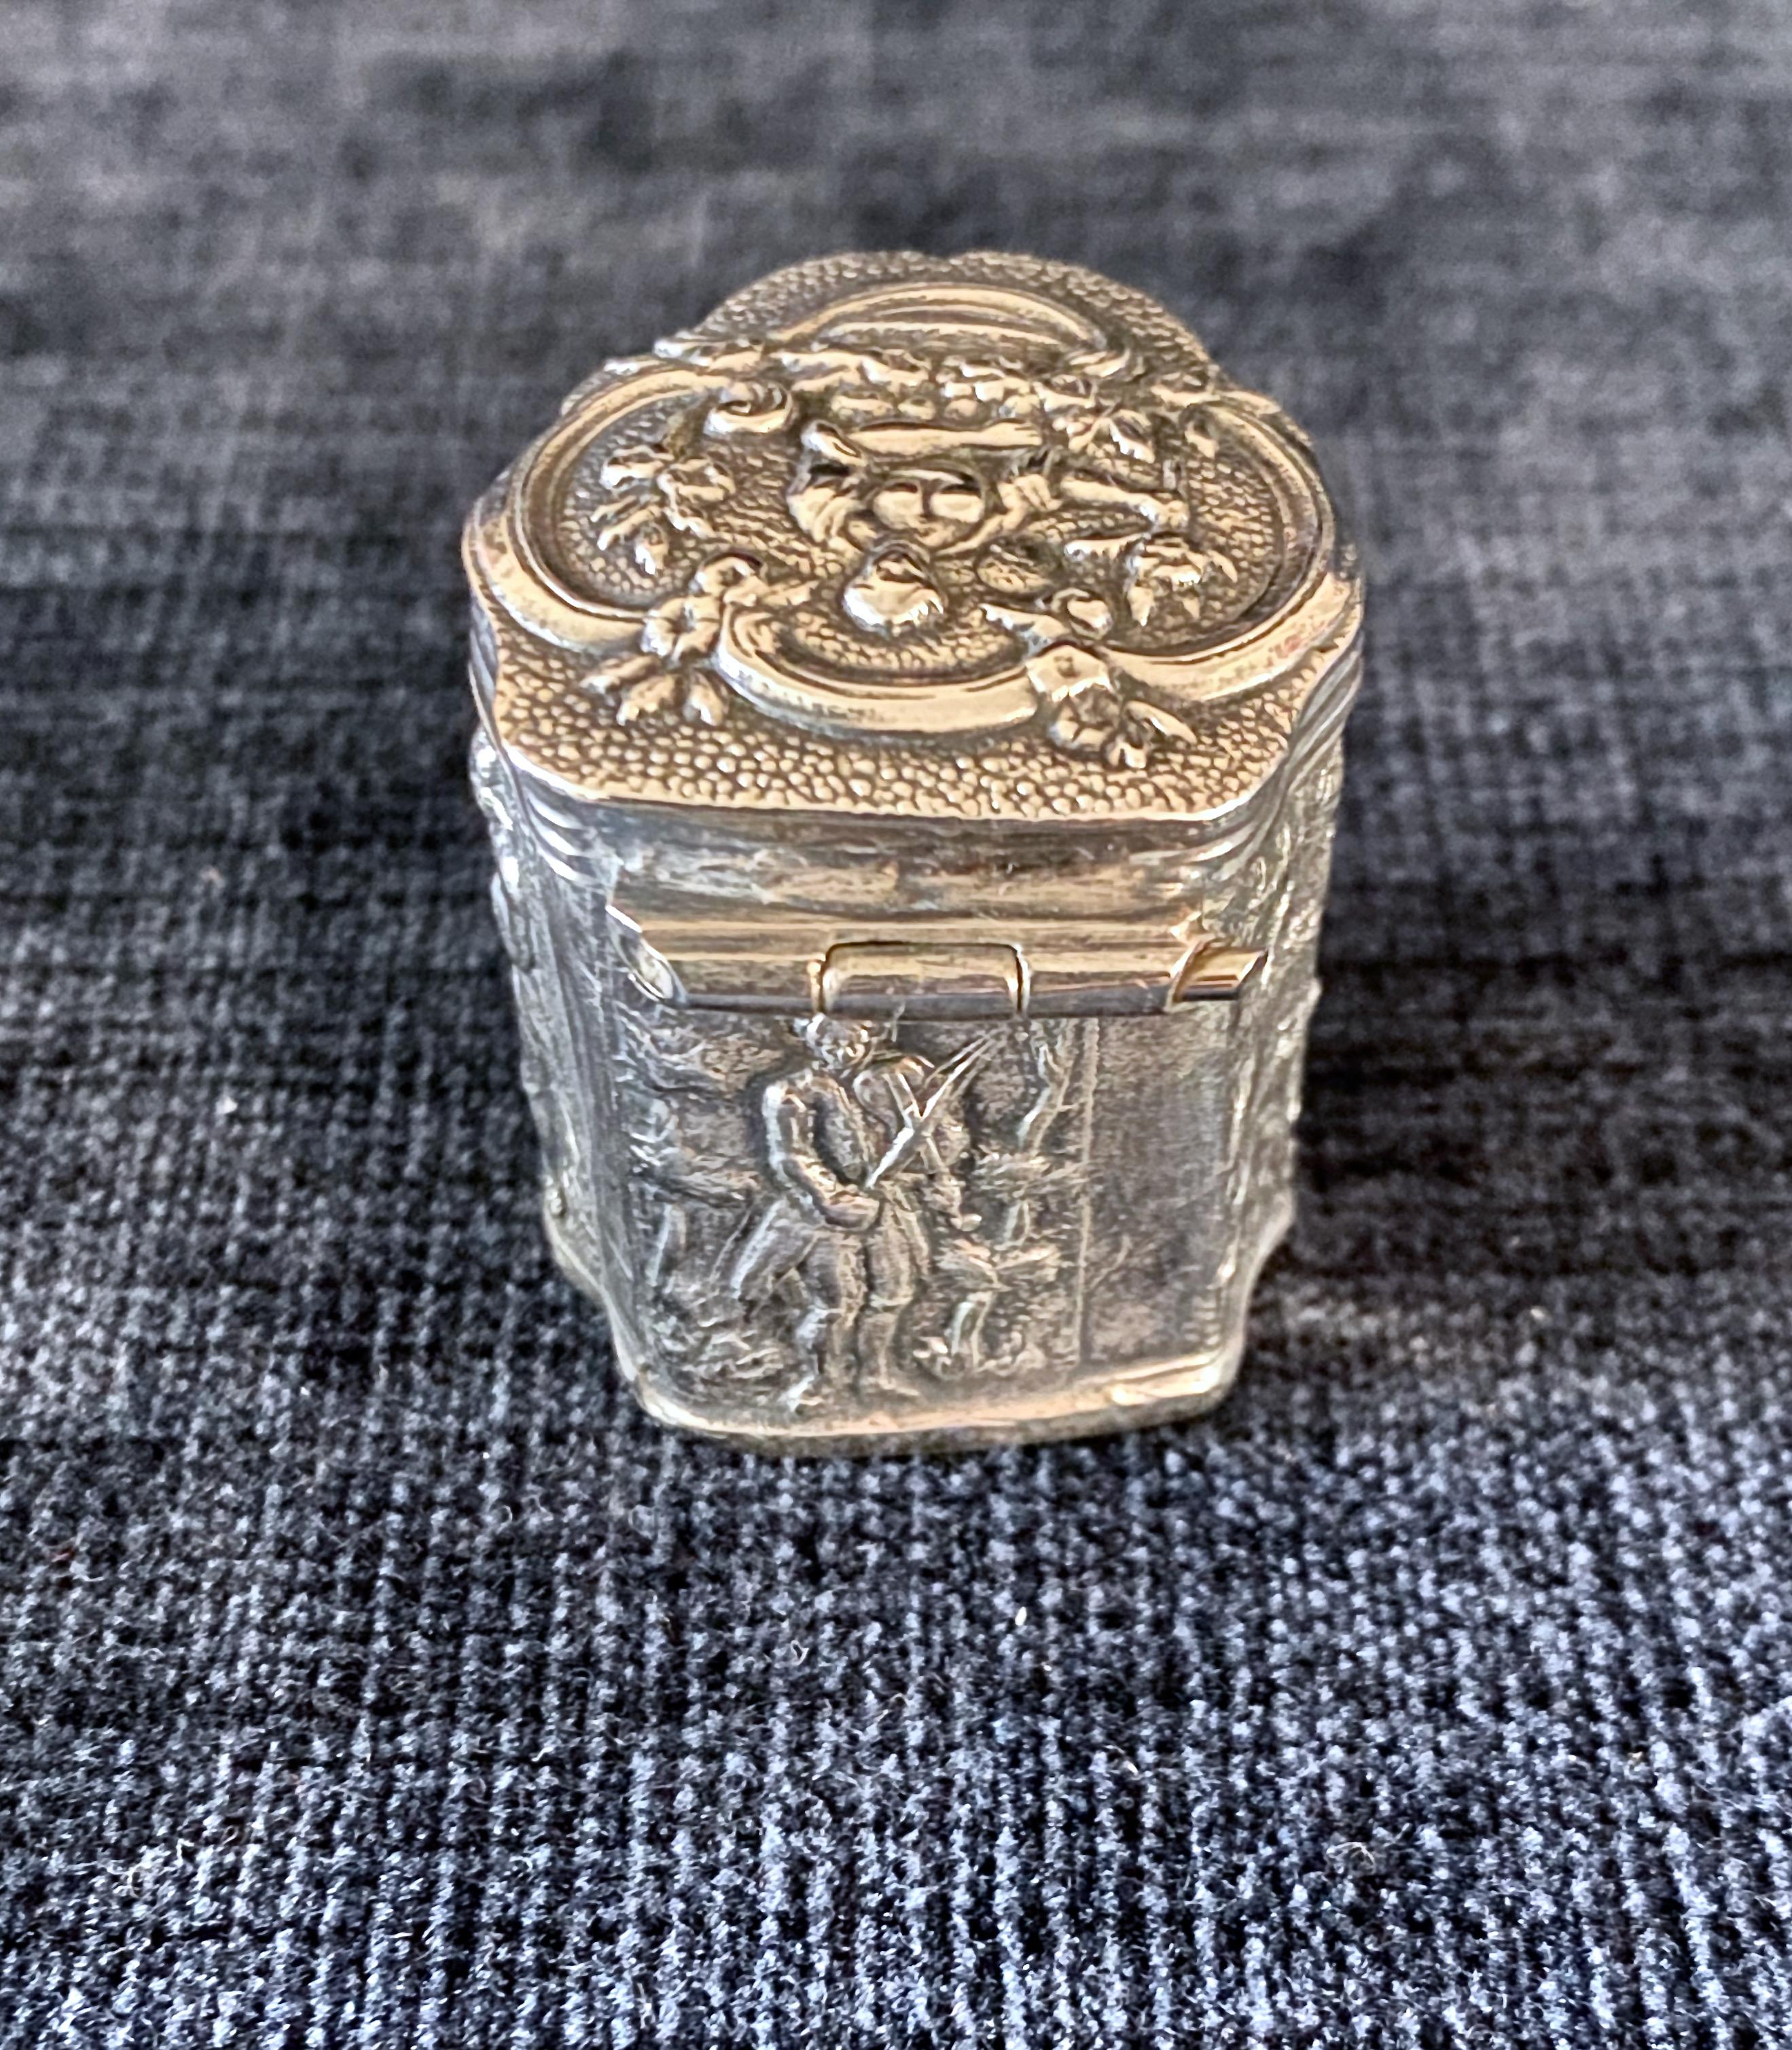 Baroque Revival Sterling Silver Repousse Pill or Snuff Box